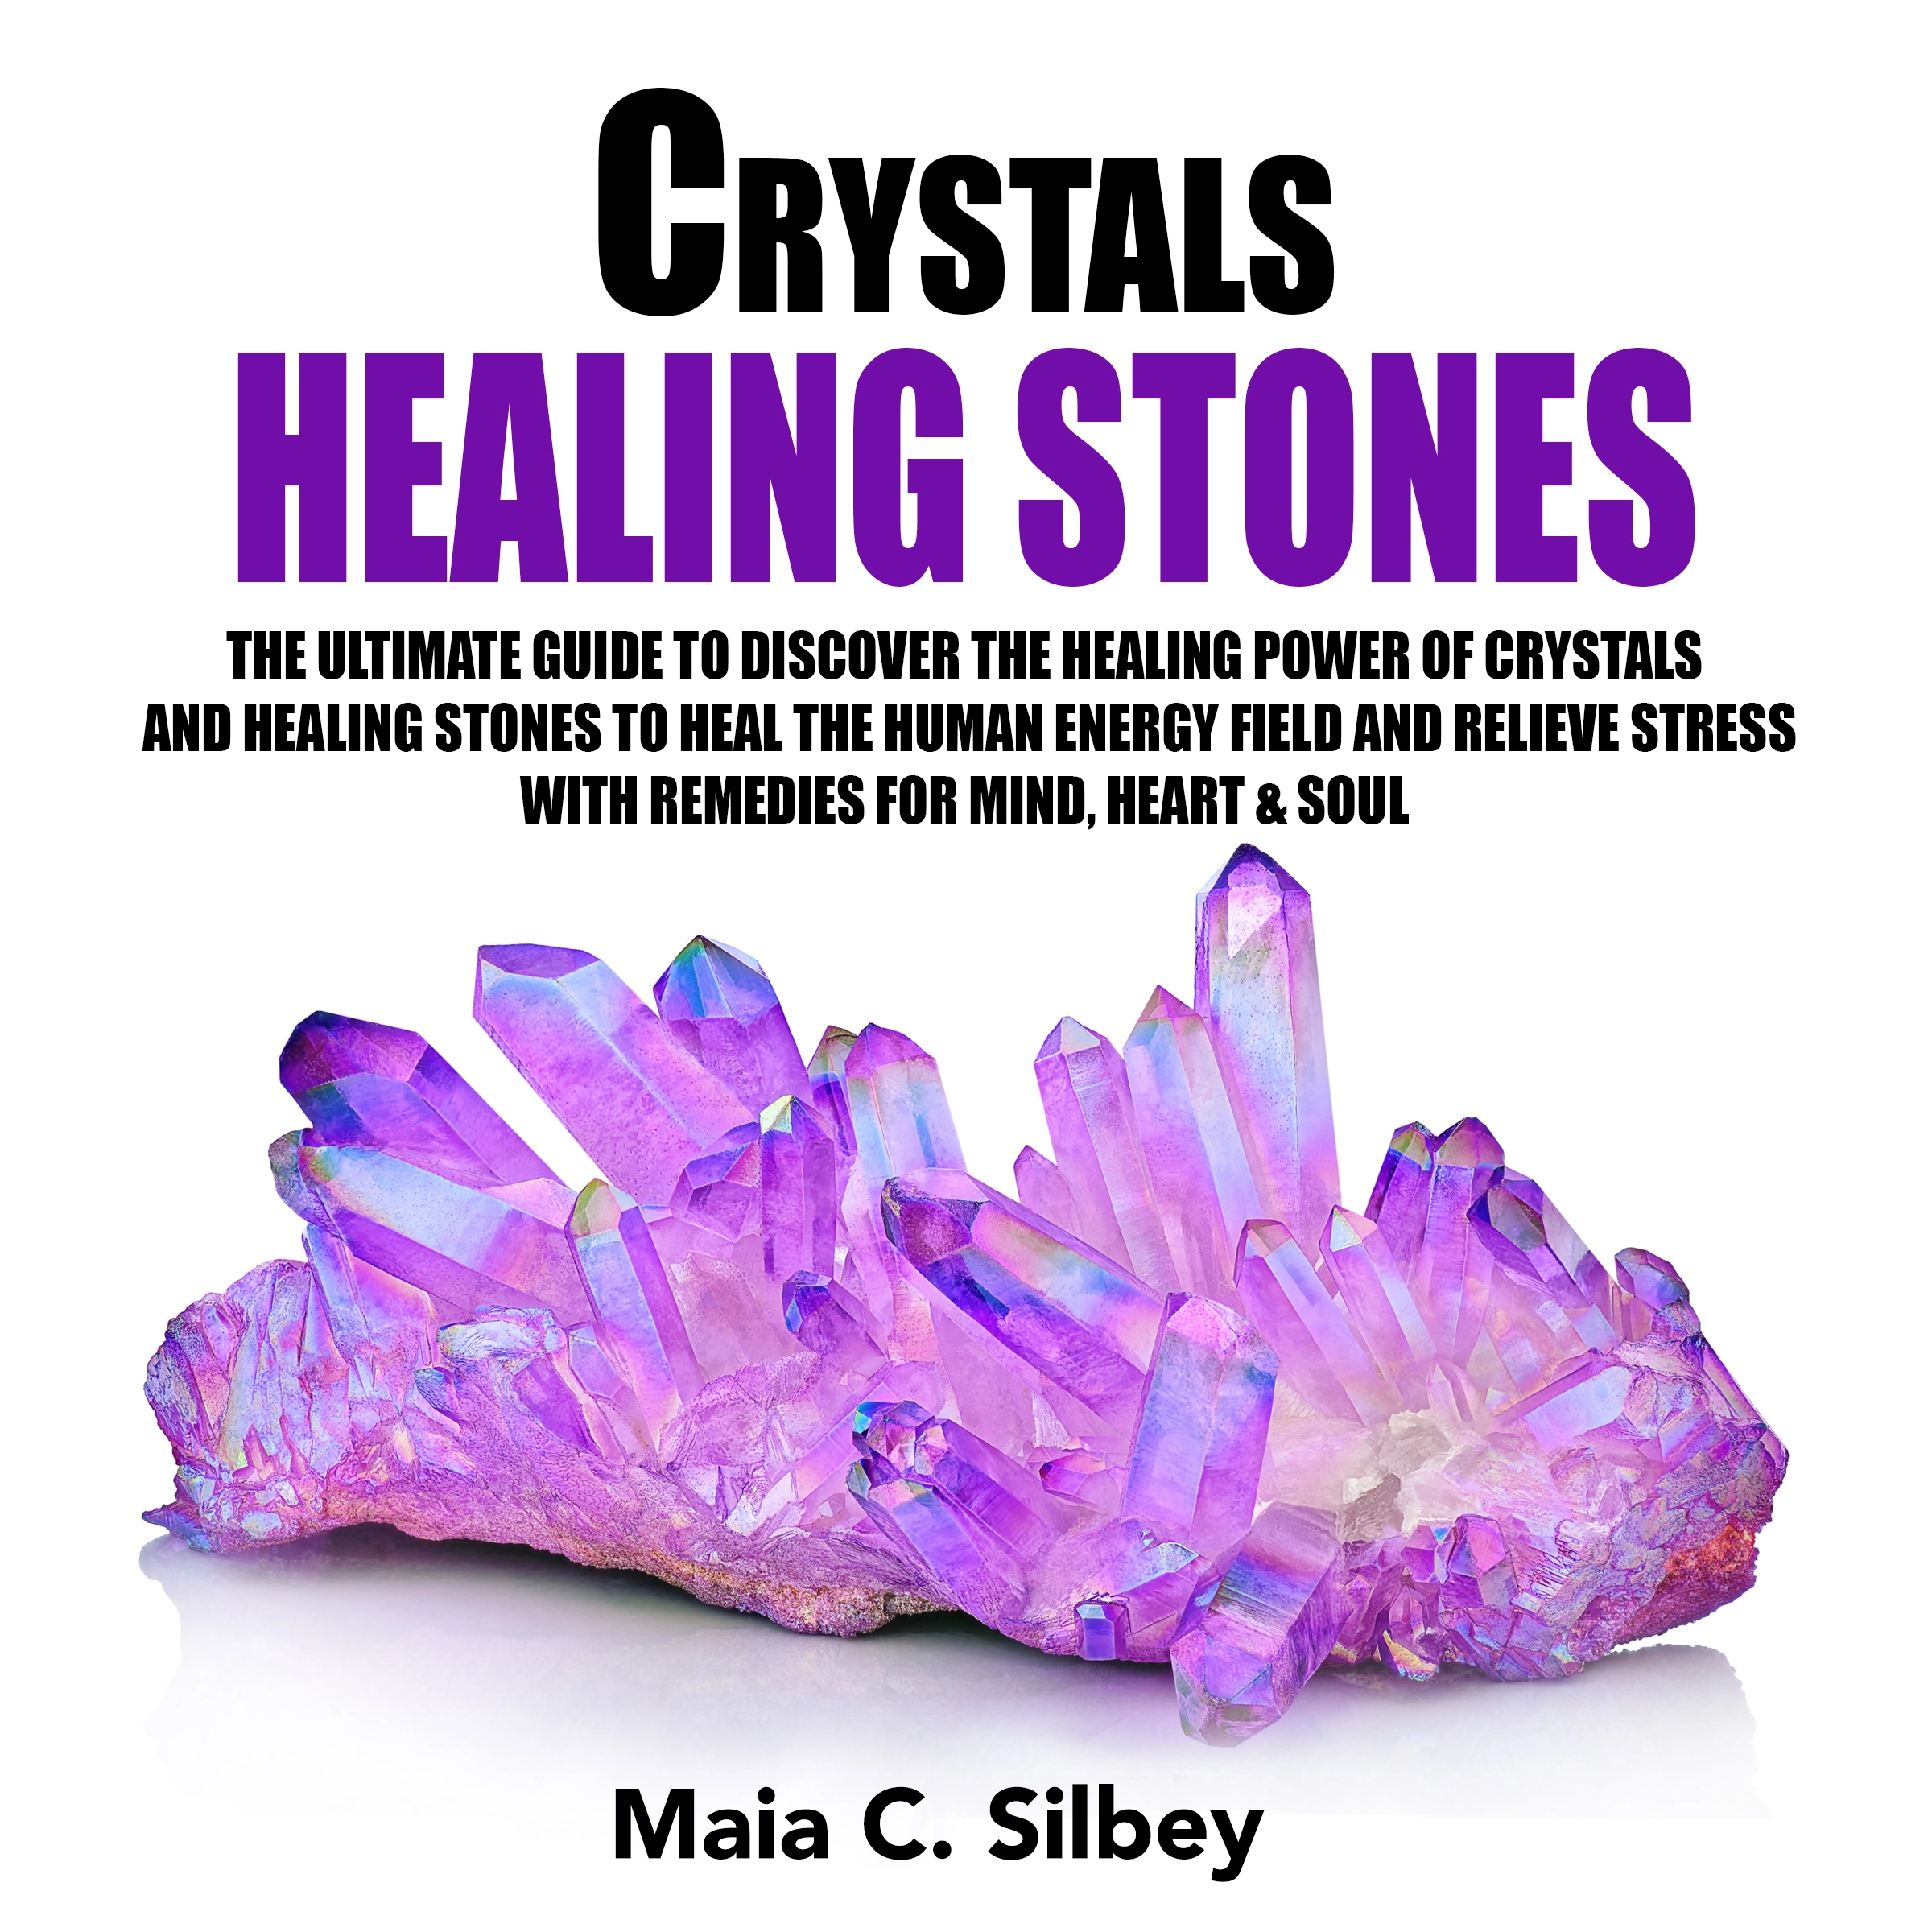 Crystals Healing Stones: The Ultimate Guide To Discover The Healing Power Of Crystals And Healing Stones To Heal The Human Energy Field and Relieve Stress With Remedies for Mind, Heart & Soul Audiobook by Maia C. Silbey